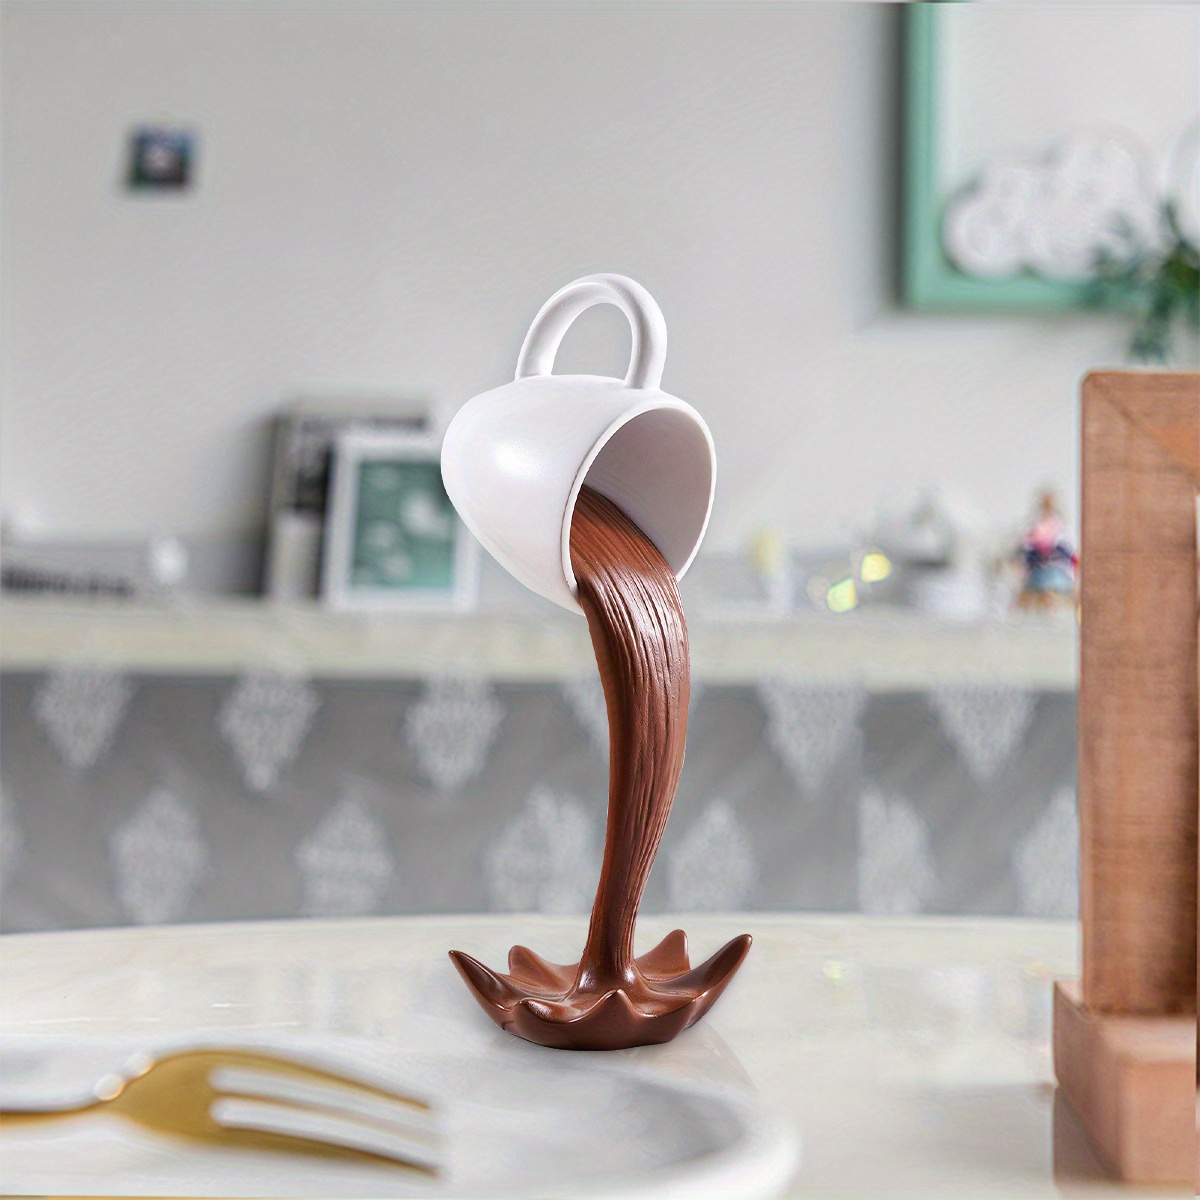 Floating Coffee Cup Ornament